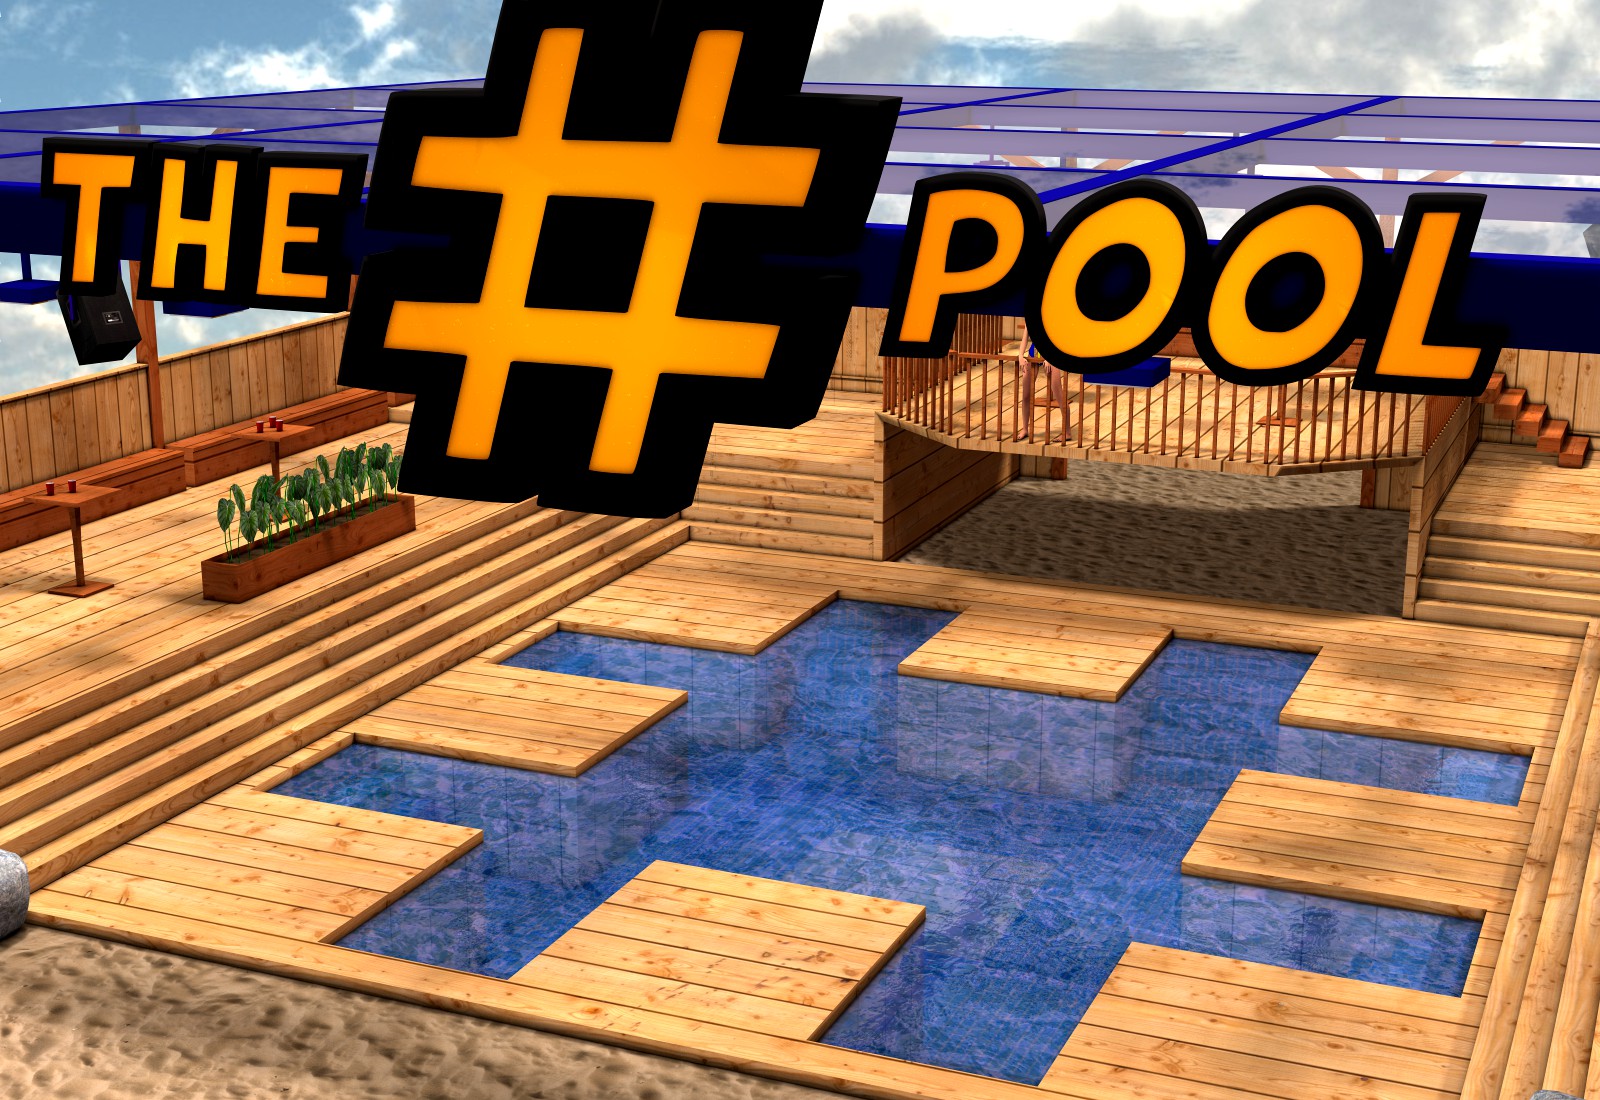 The Hashtag Pool  for Poser 7+